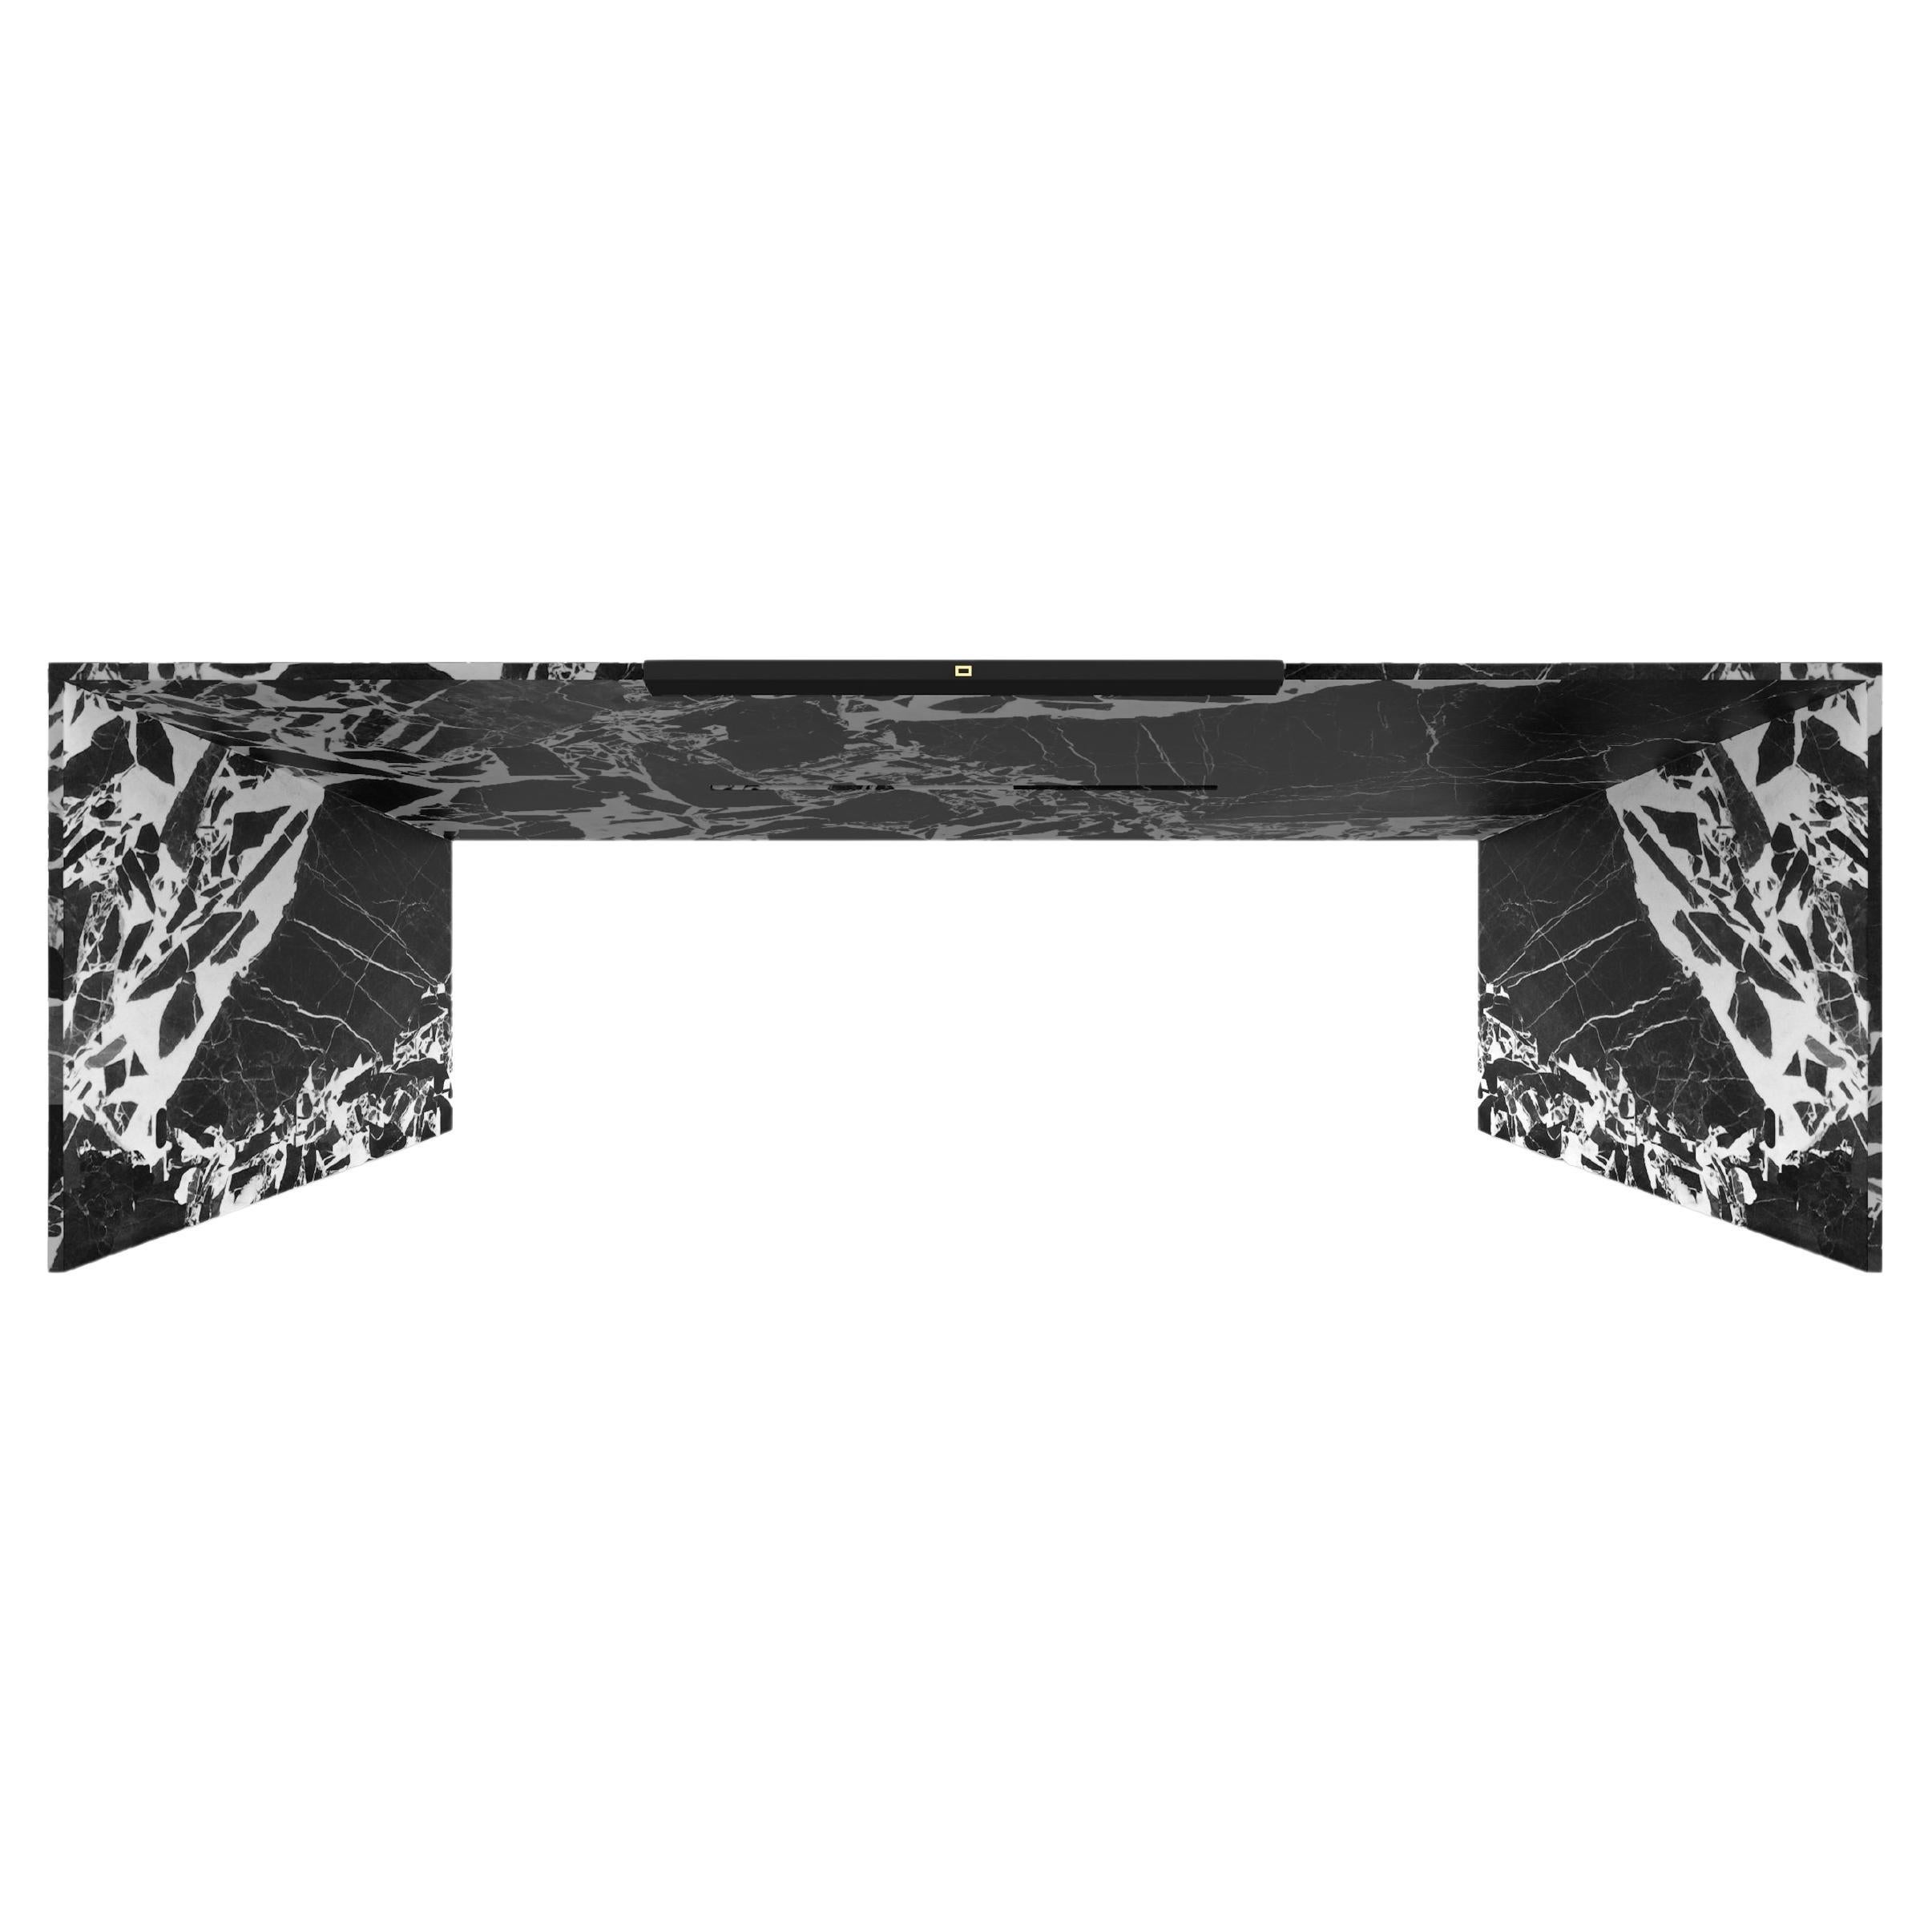 Desk, Black Marble, 225x75x75cm Triangular secret compartment Handcrafted, pc1/1 For Sale